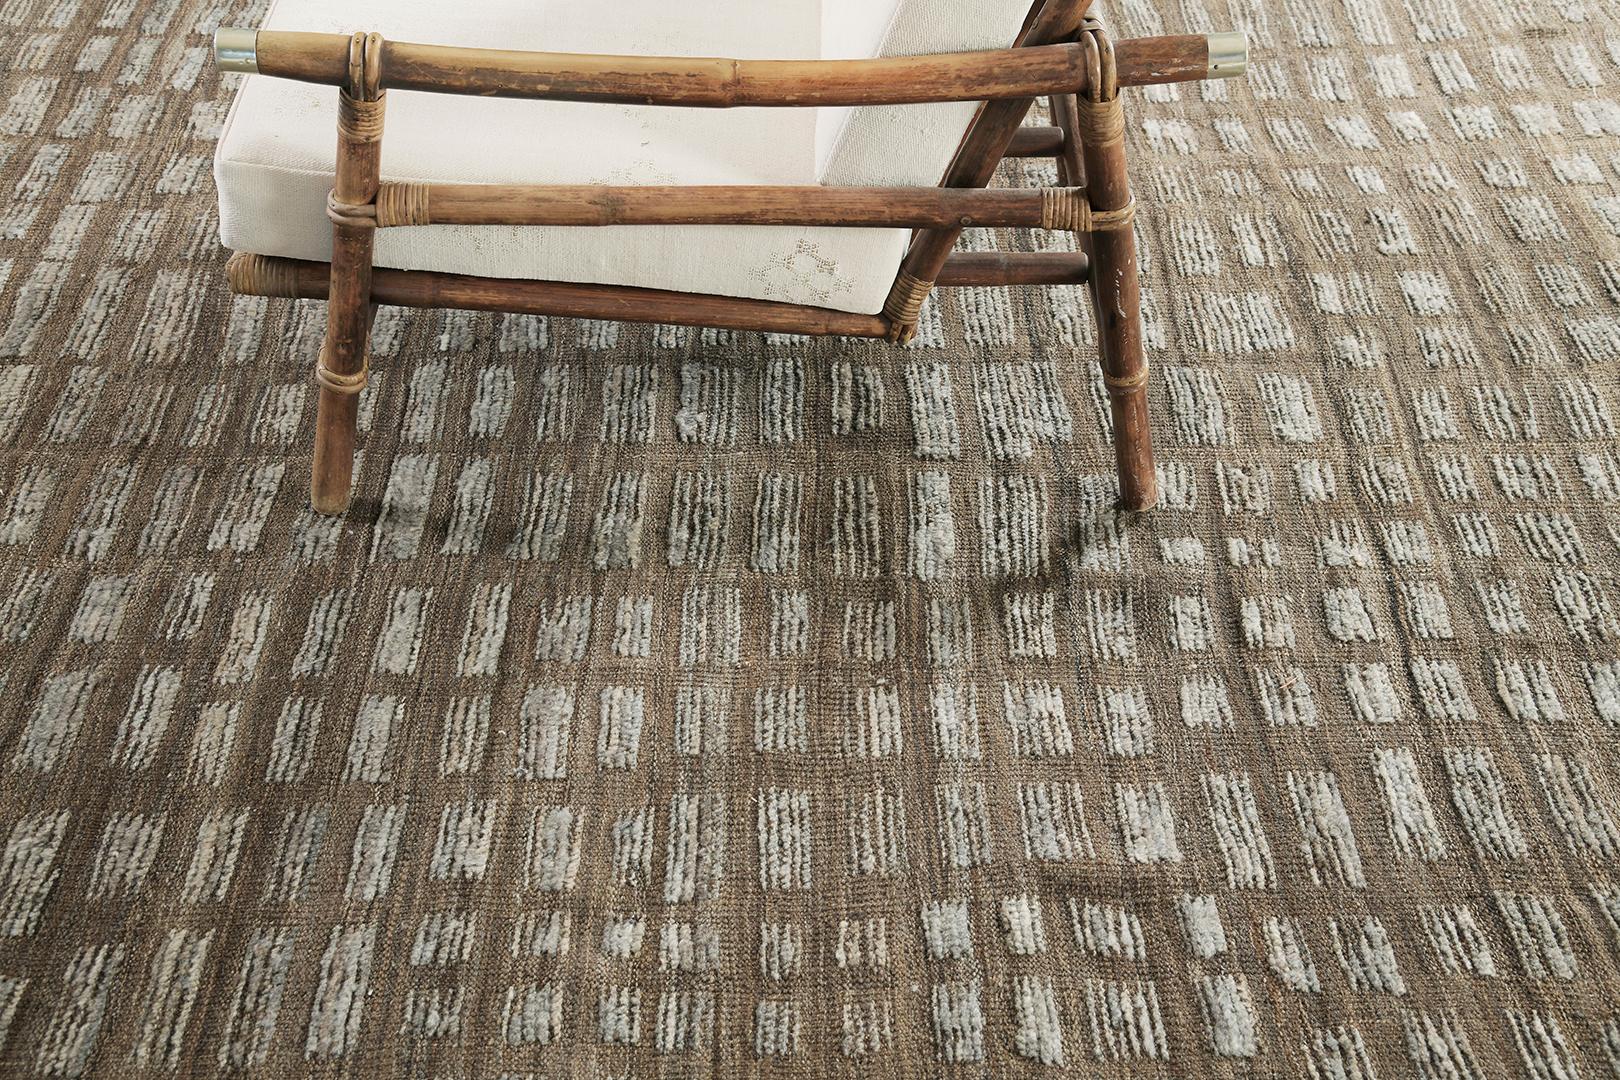 Byzacena features a series of symbolic motifs that complement the entirety of this breathtaking rug. Lozenges and X motifs in the brilliant shades of charcoal, gray and flaxen bring sophistication to this elegant rug. Mehraban's Atlas collection is